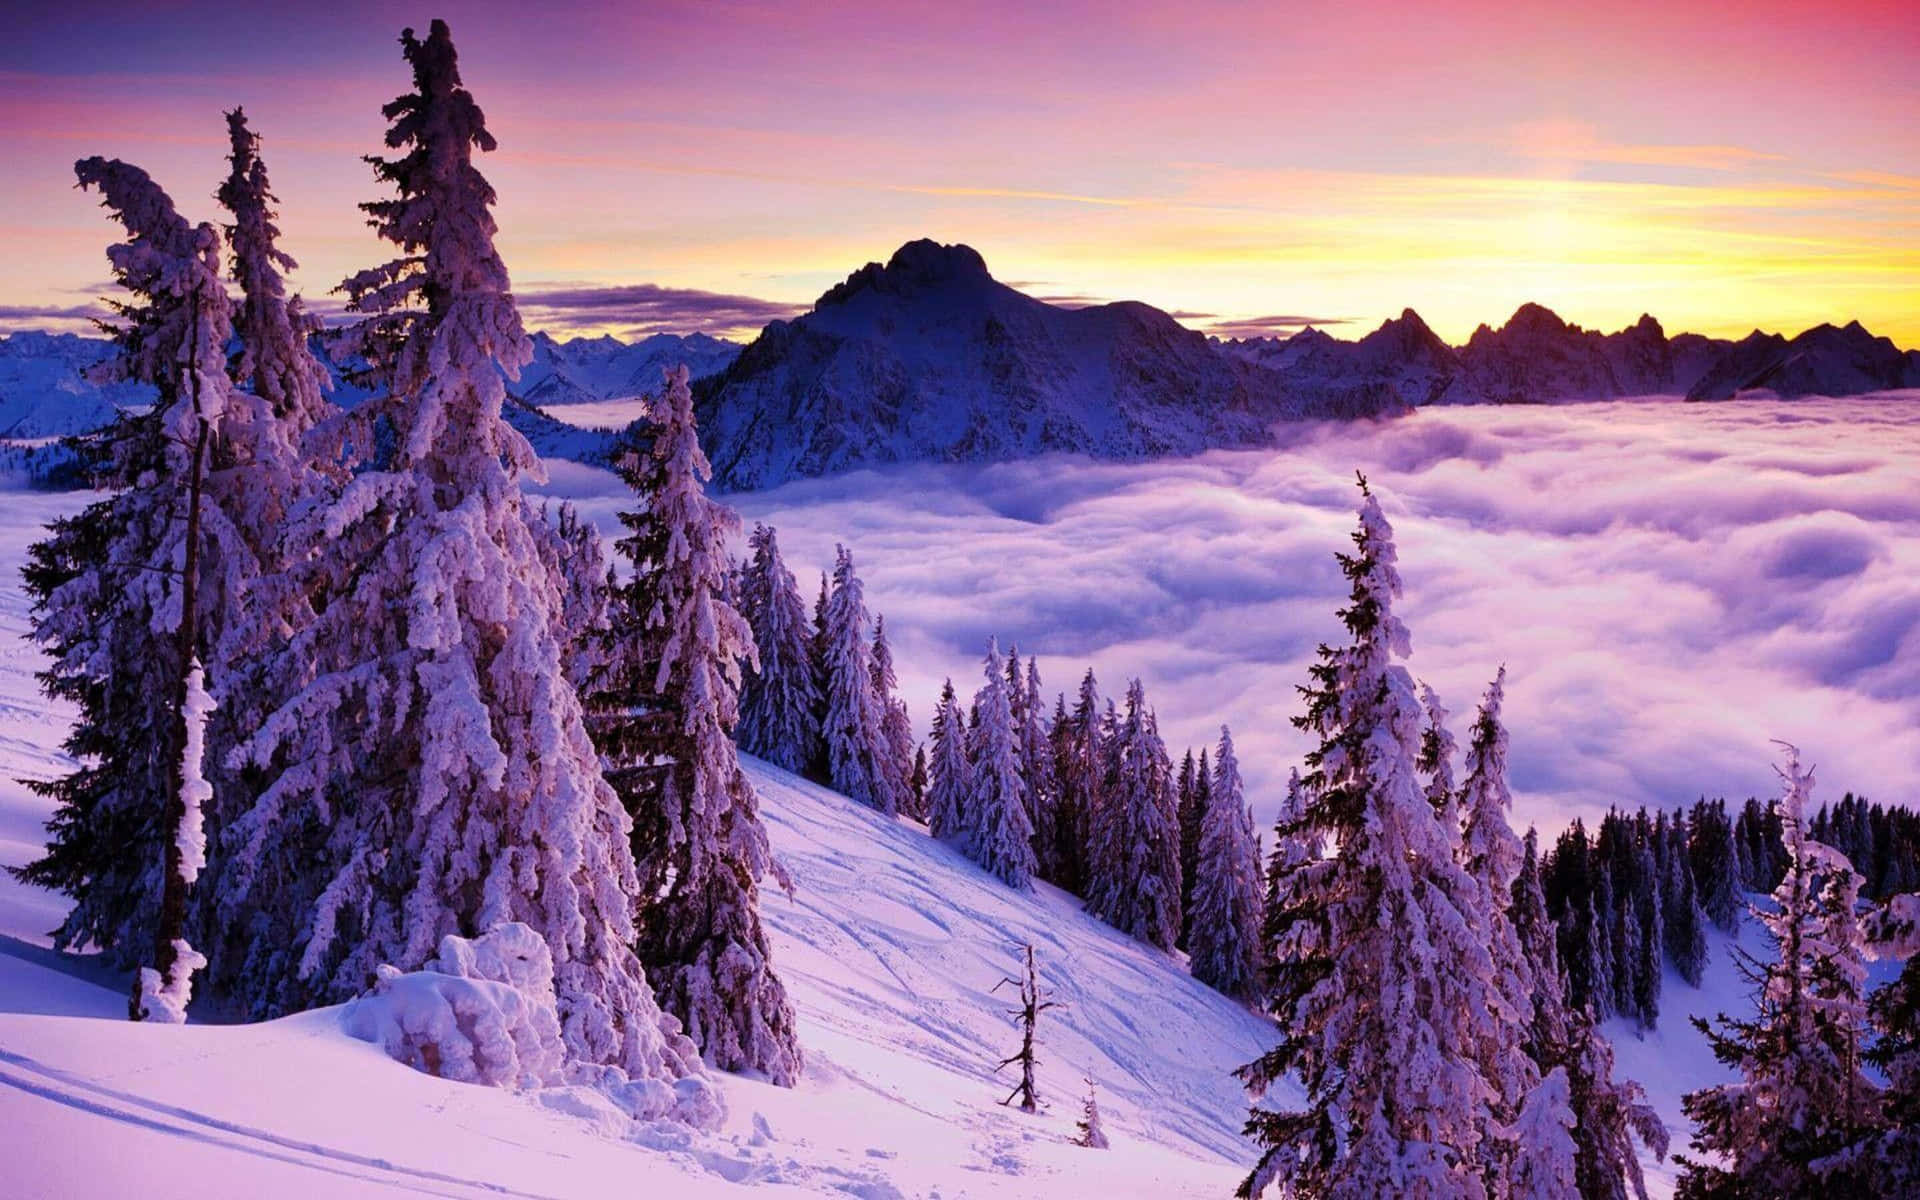 Take in the beauty of a snow-covered mountain